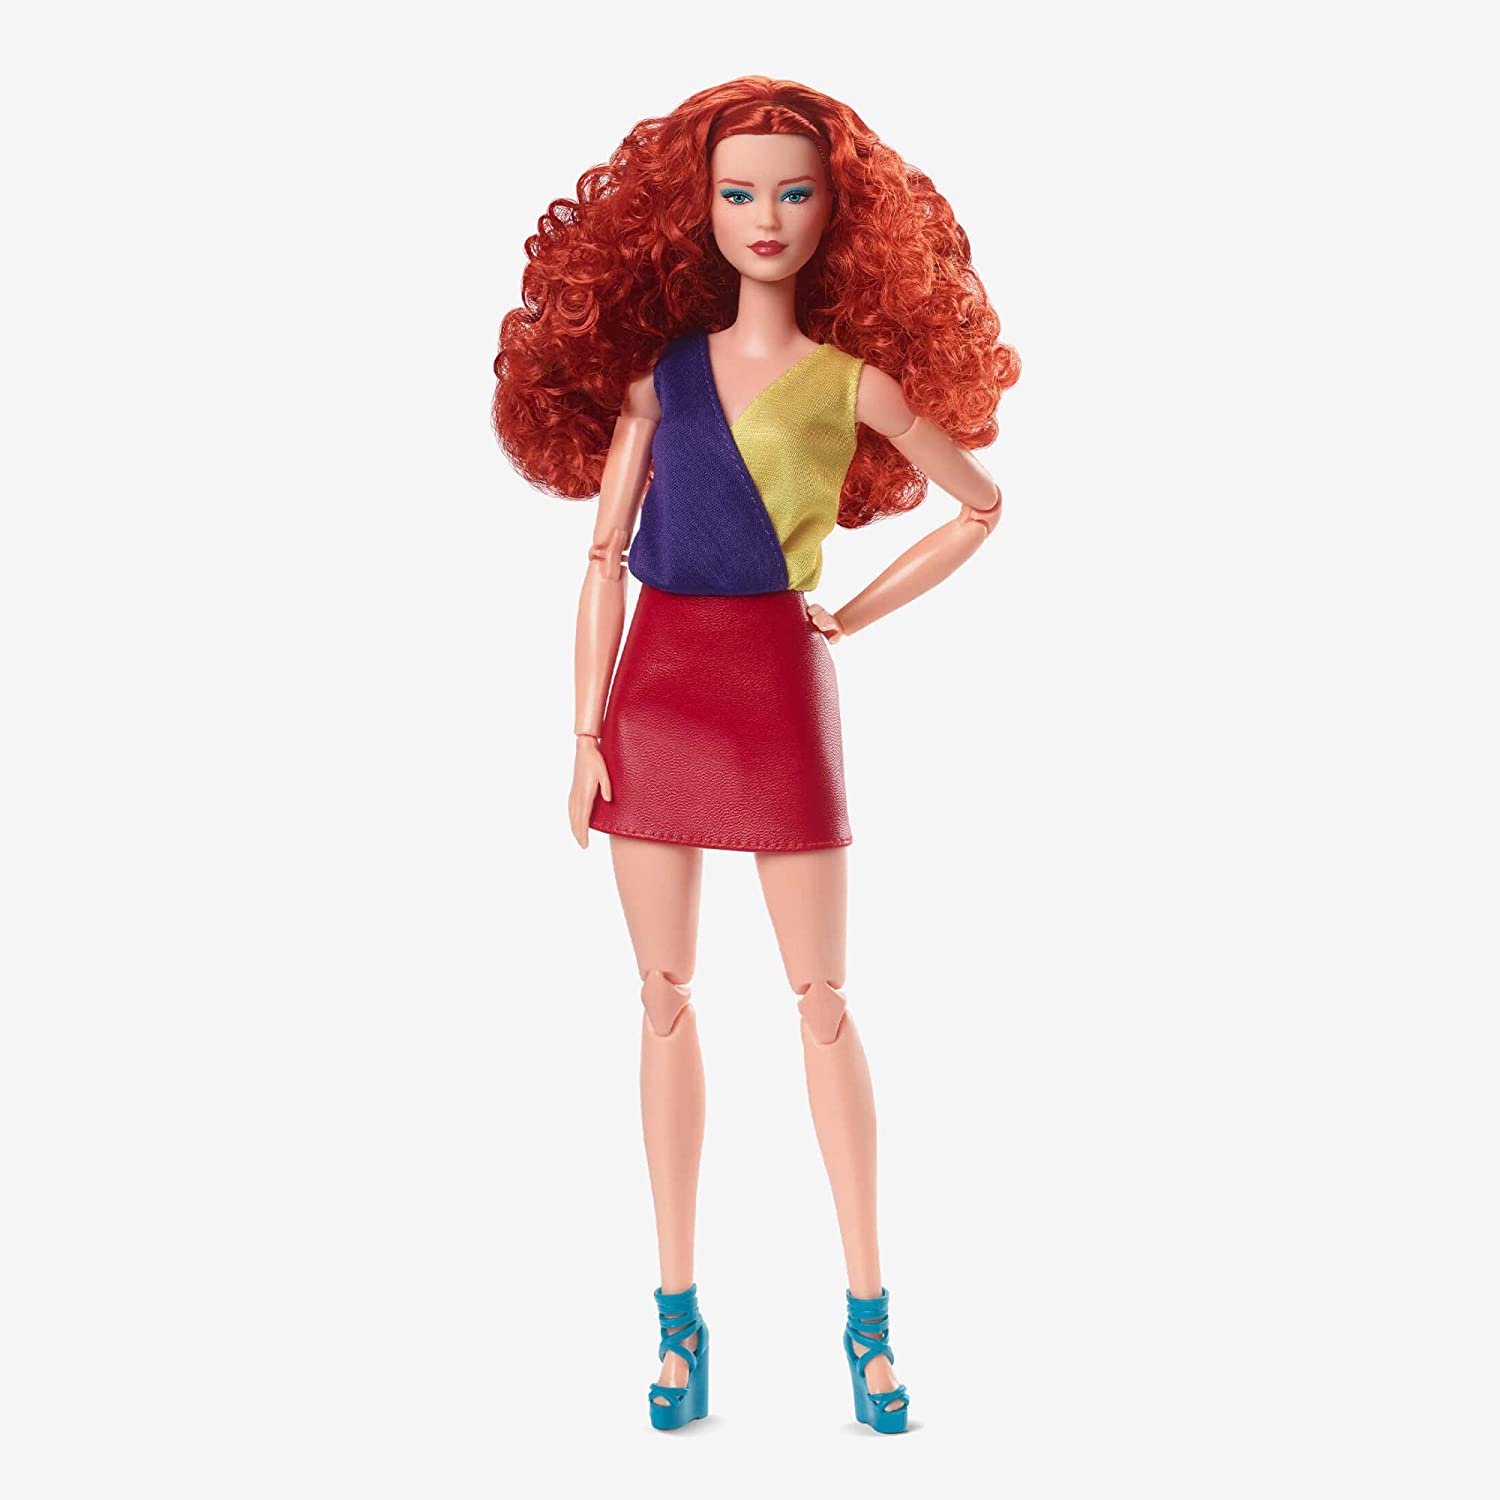 New Barbie The Movie collection from Mattel is available now